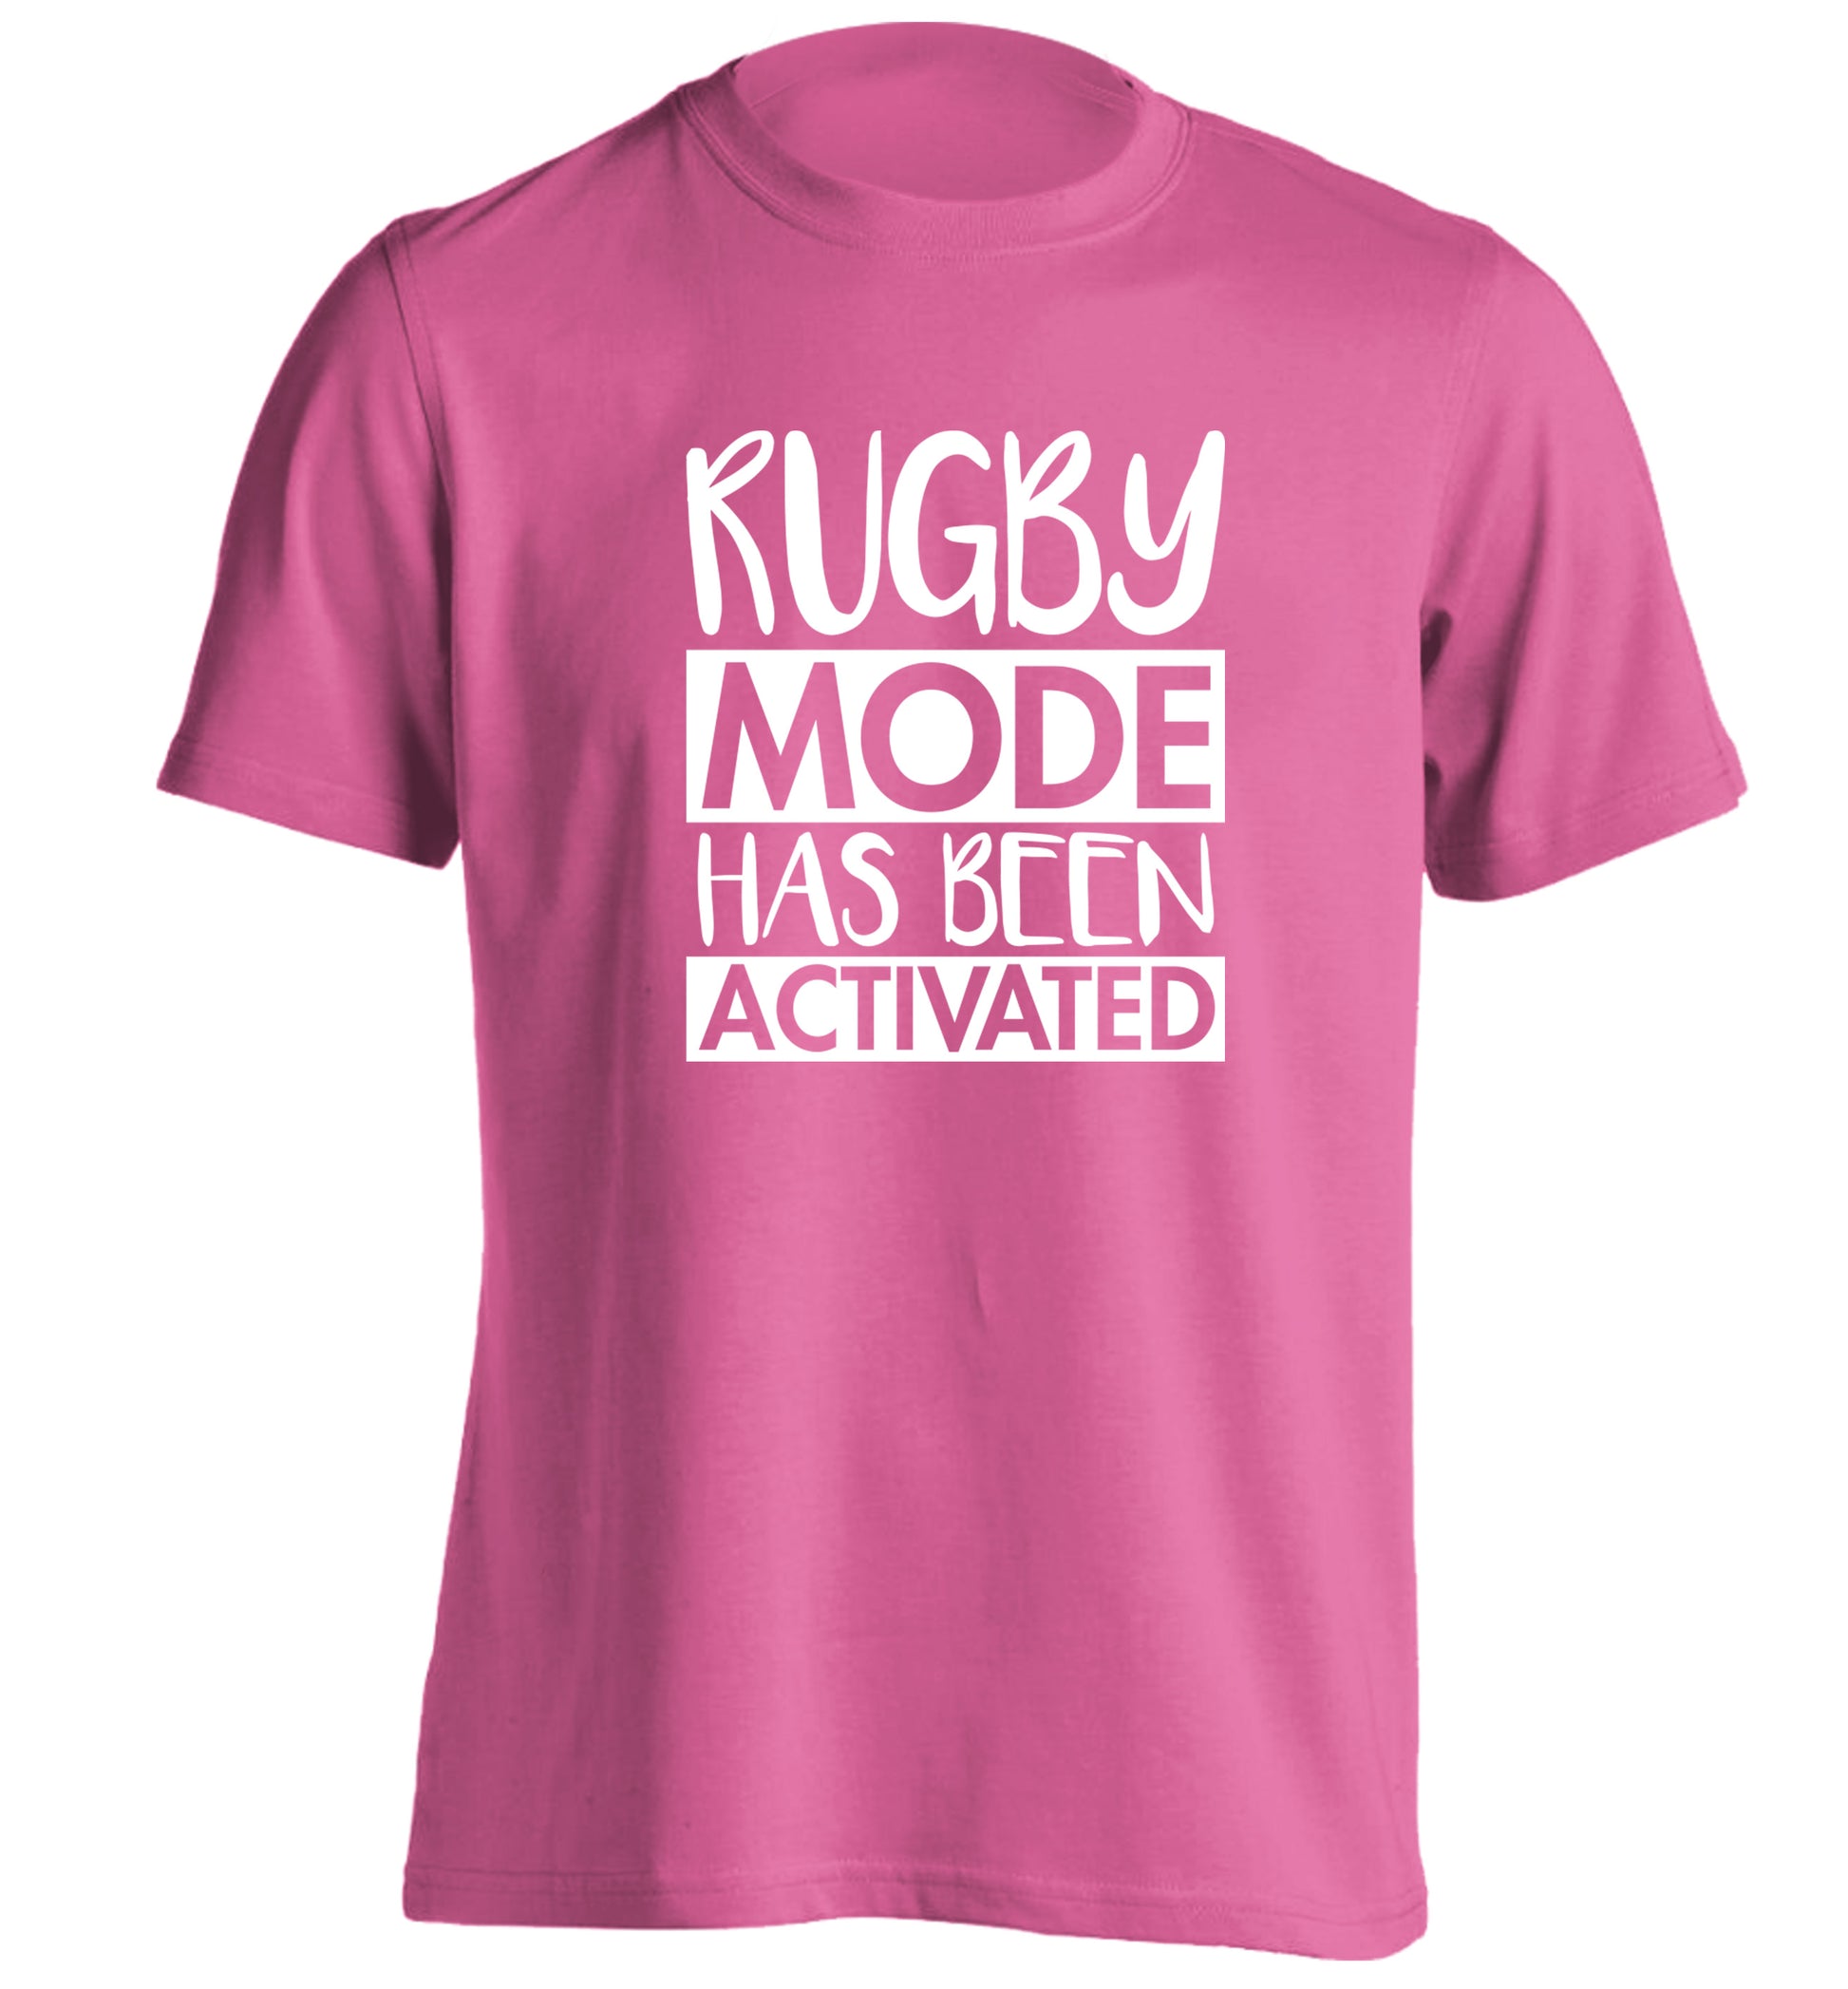 Rugby mode activated adults unisex pink Tshirt 2XL